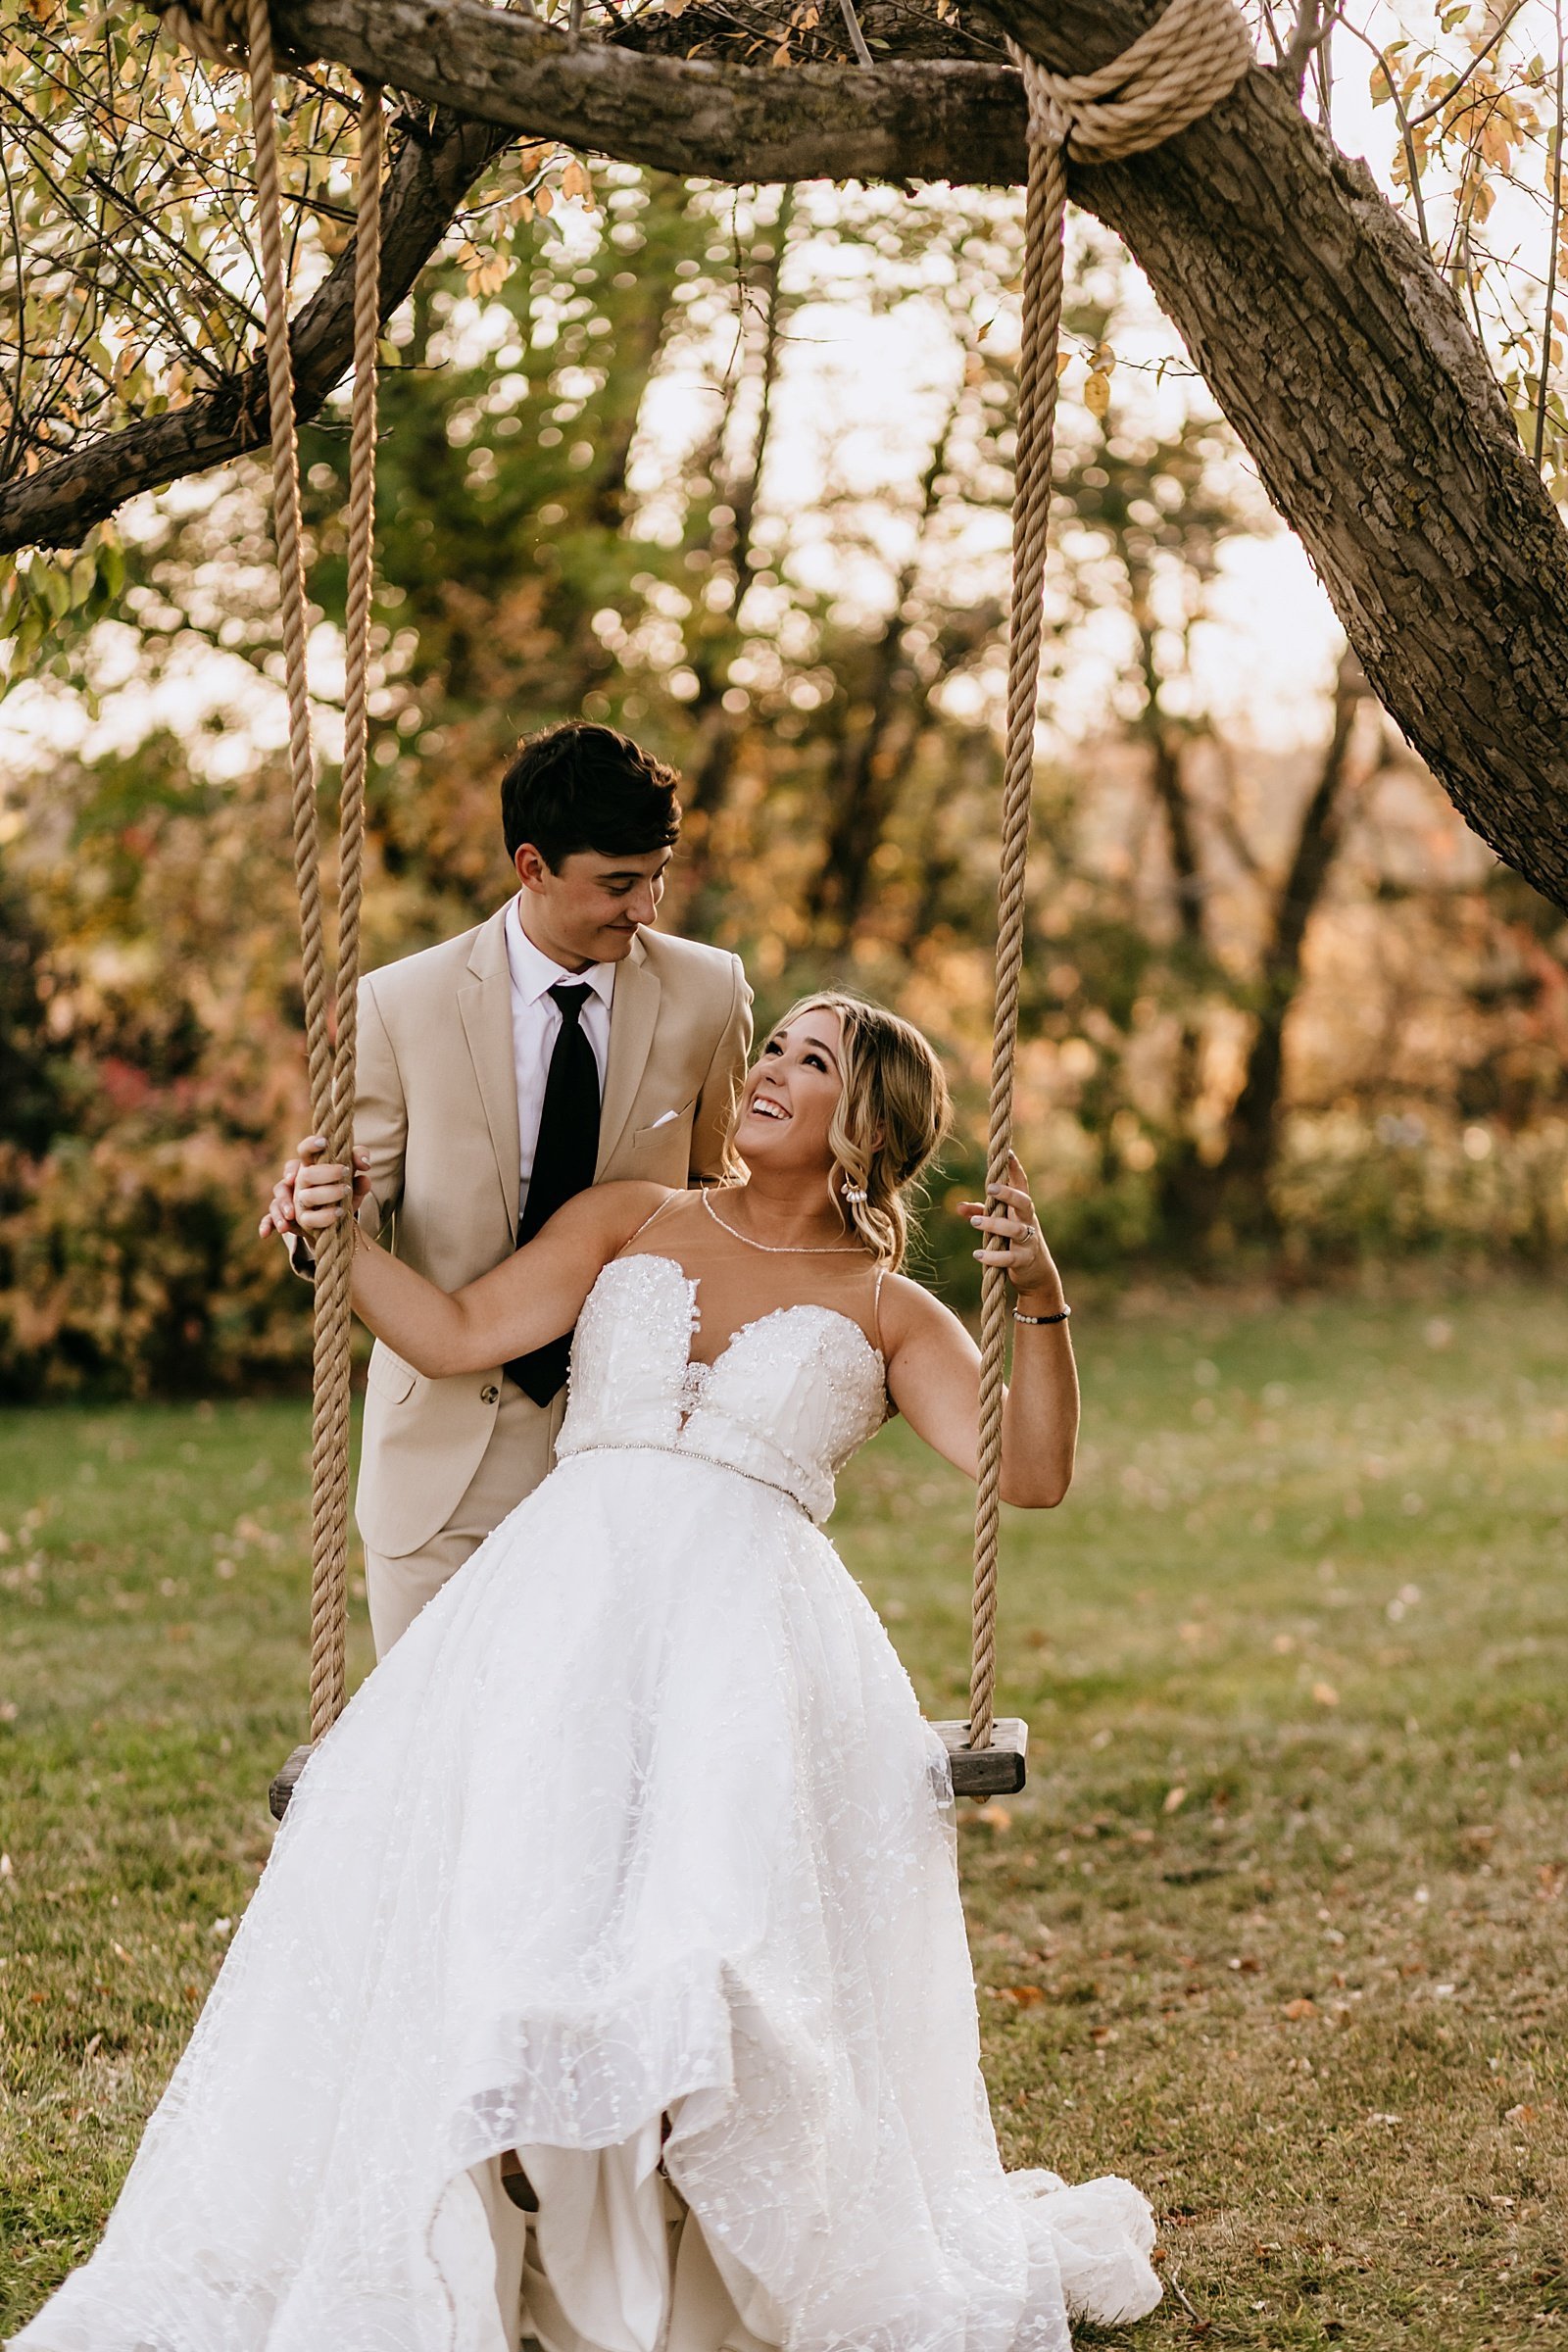  Bride swinging on a tree swing with groom pushing her for their Minnesota fall wedding 